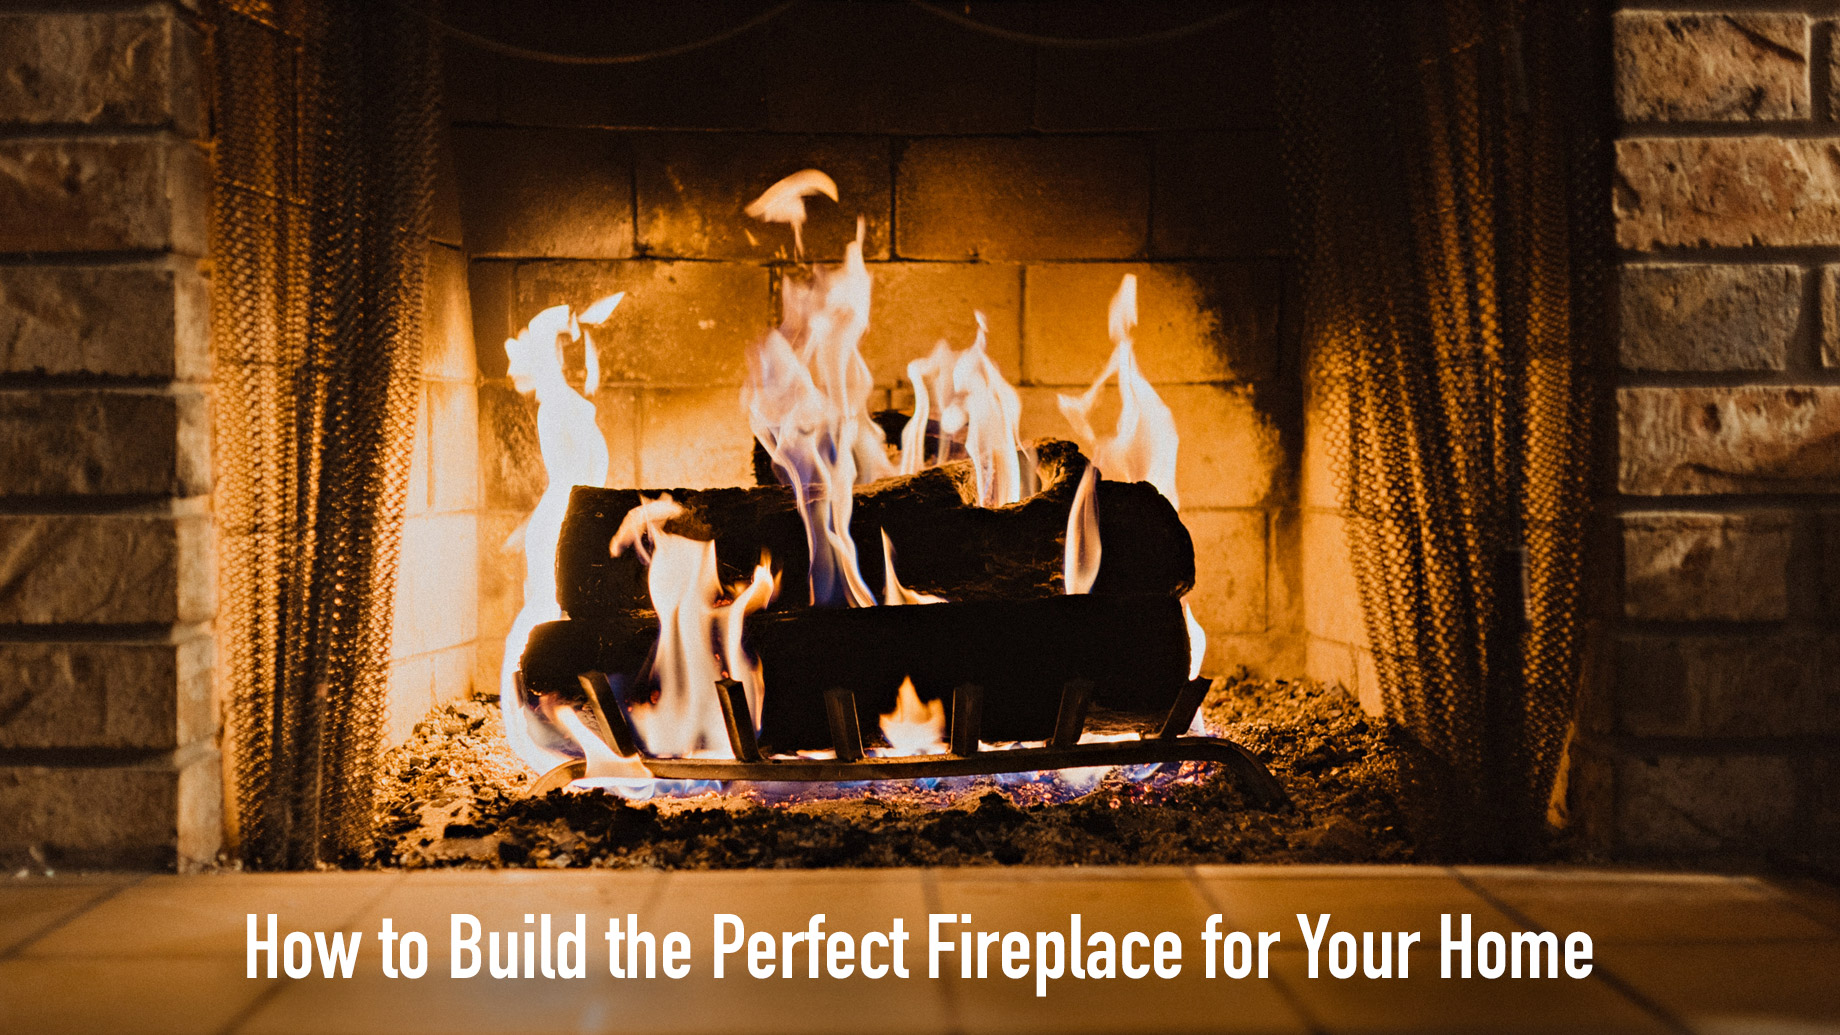 How to Build the Perfect Fireplace for Your Home